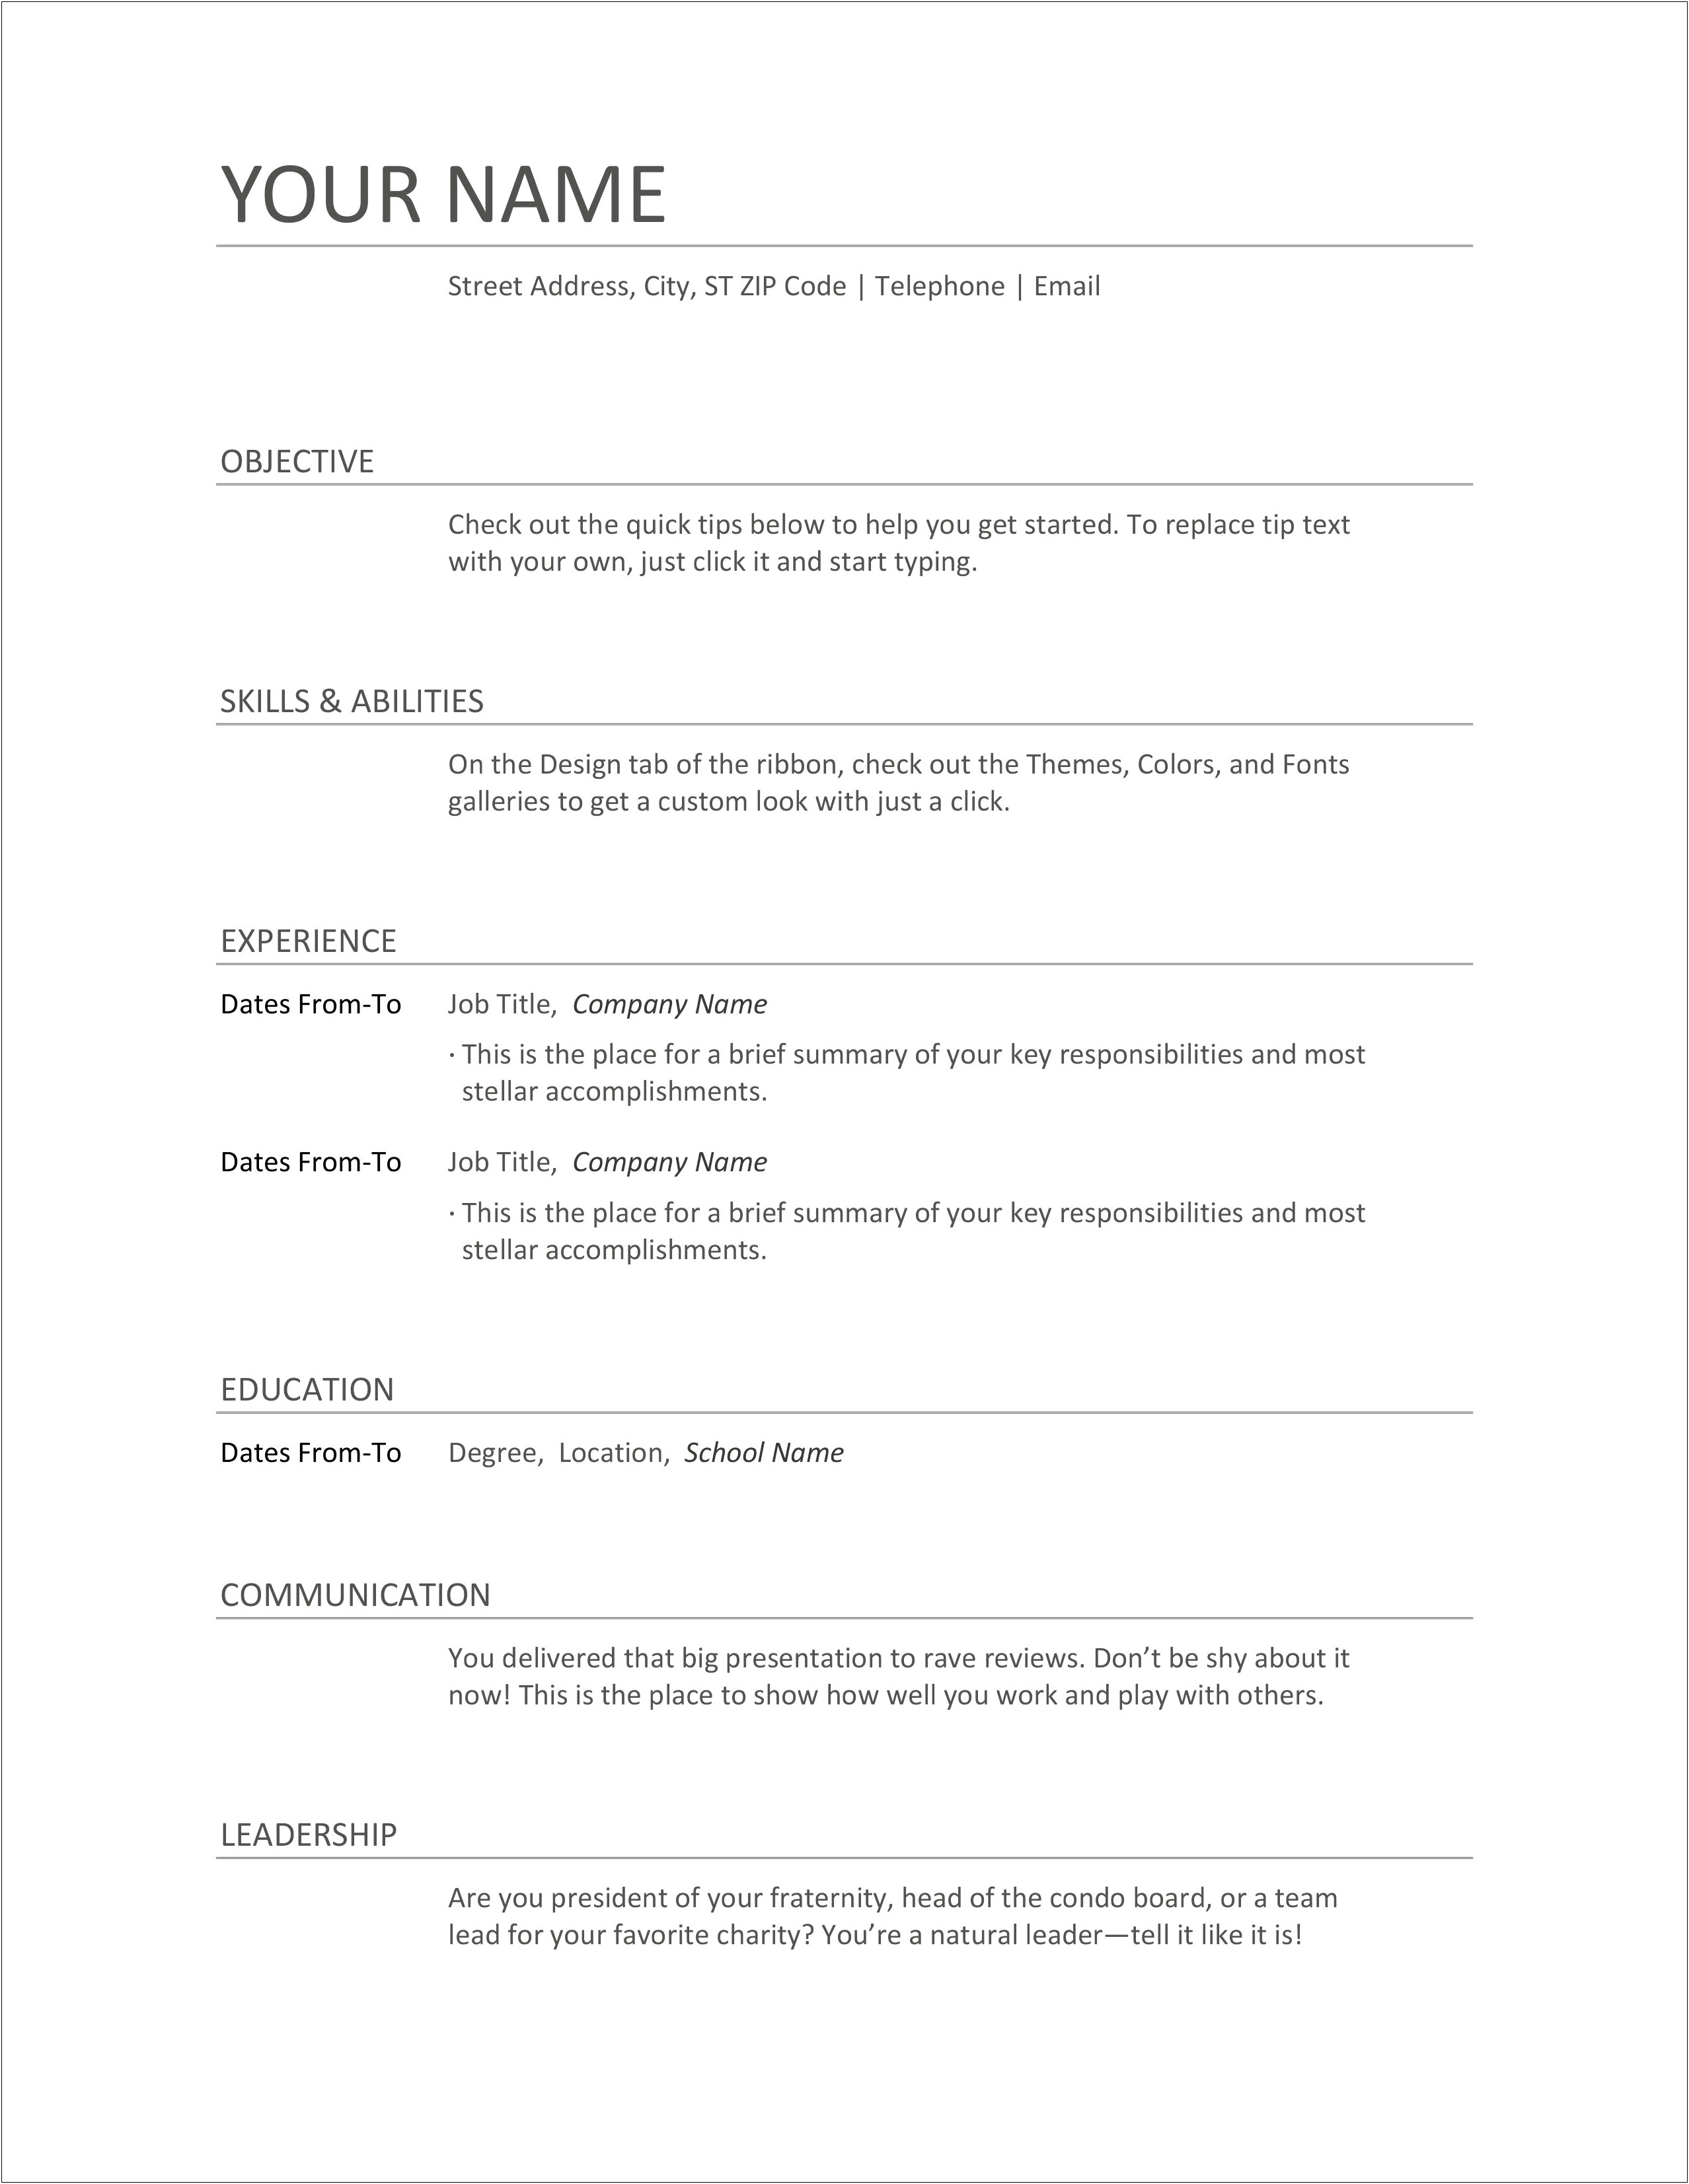 Replacement Words For Created And Worked In Resume